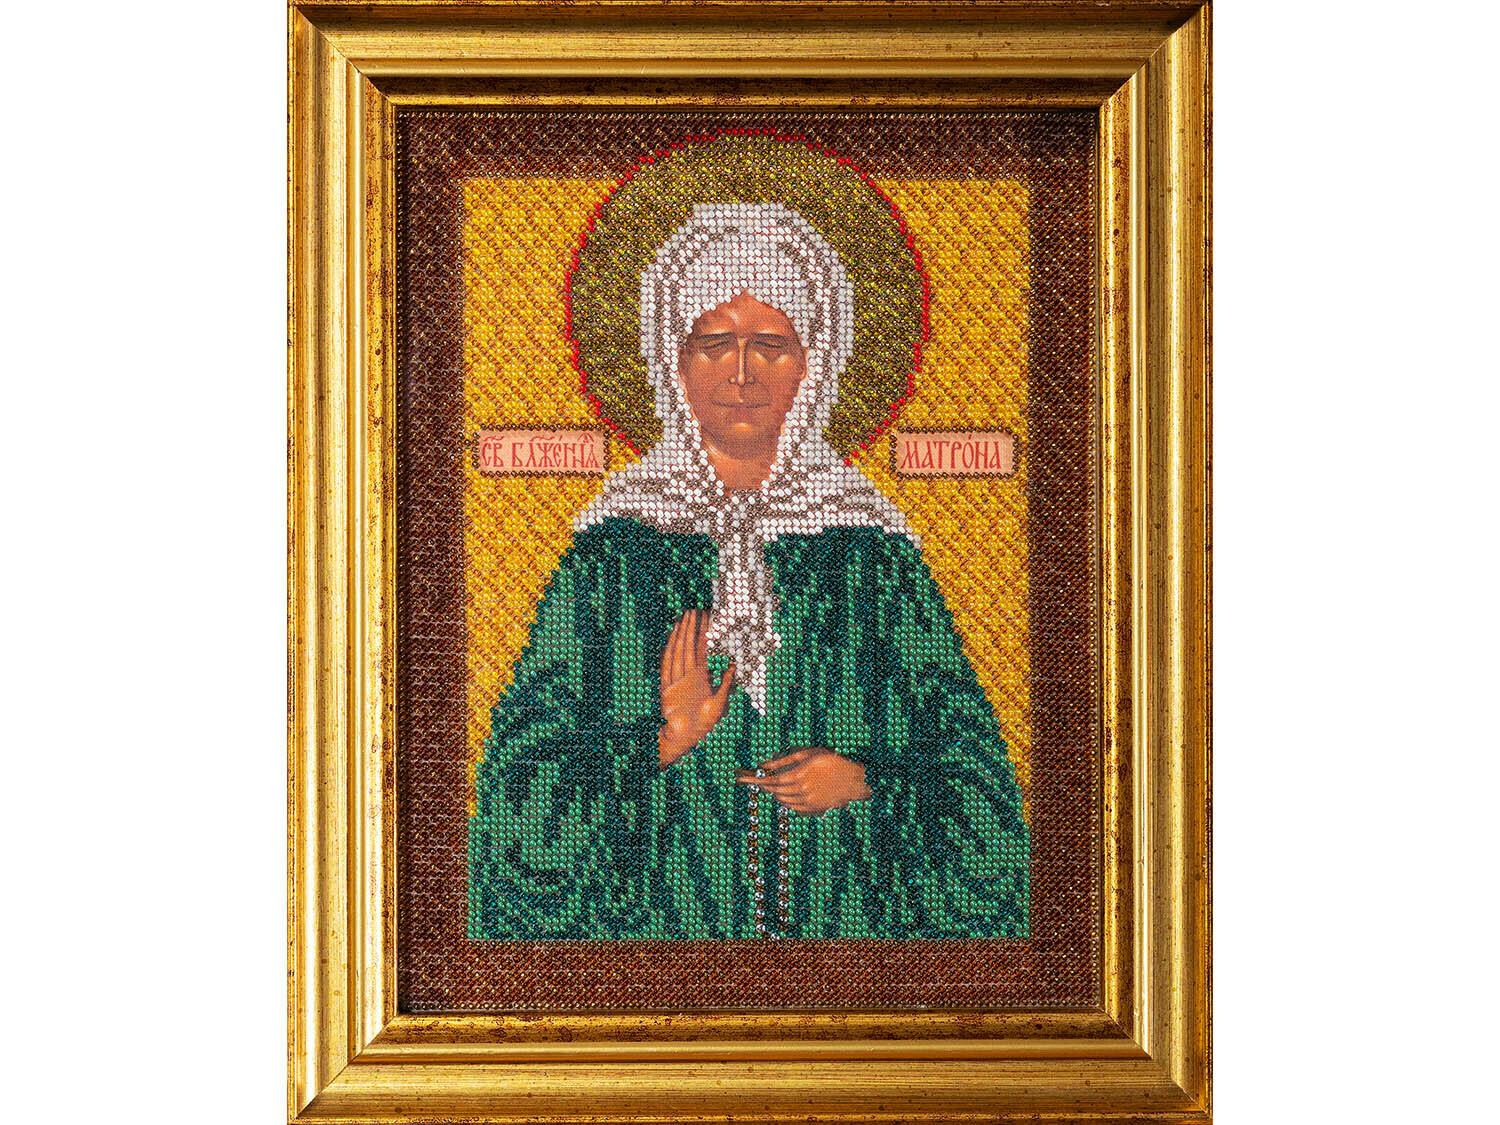 Blessed Matrona of Moscow